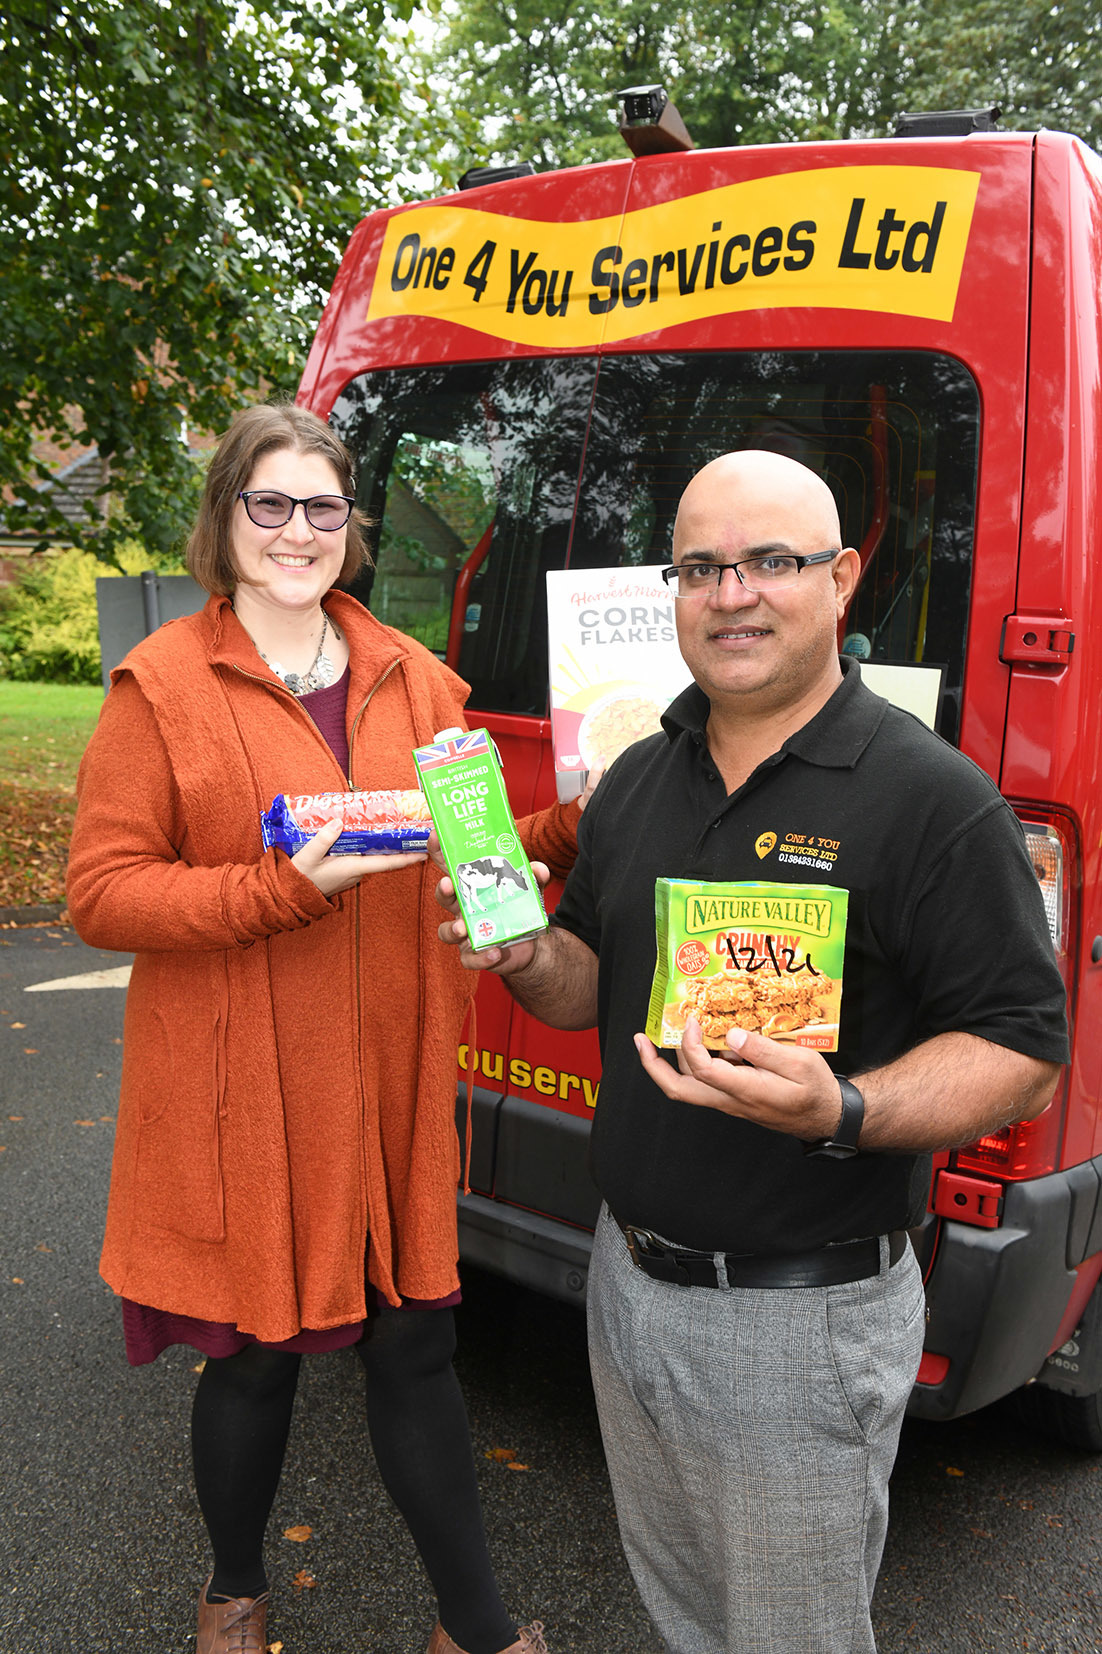 L-r - Bryoni Barbosa (Dudley Council) with Abrar Ahmed (One 4 You Services)